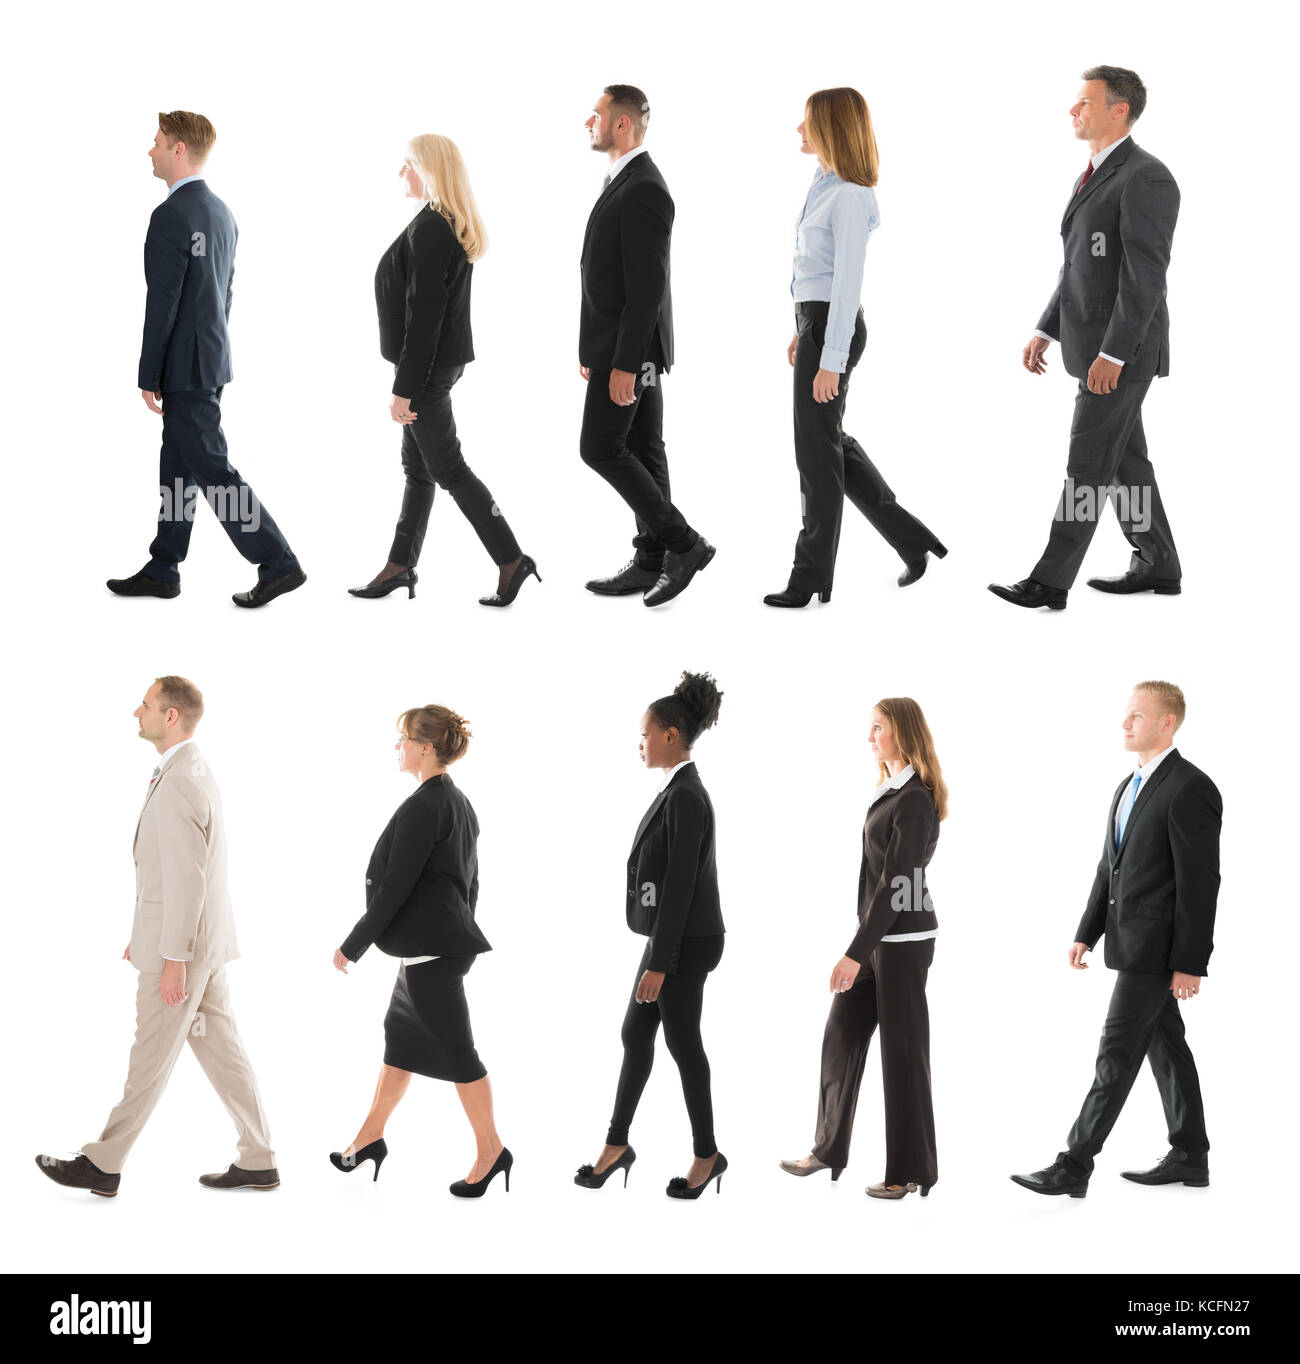 Collage Of Businesspeople Walking In Line Against White Background Stock Photo